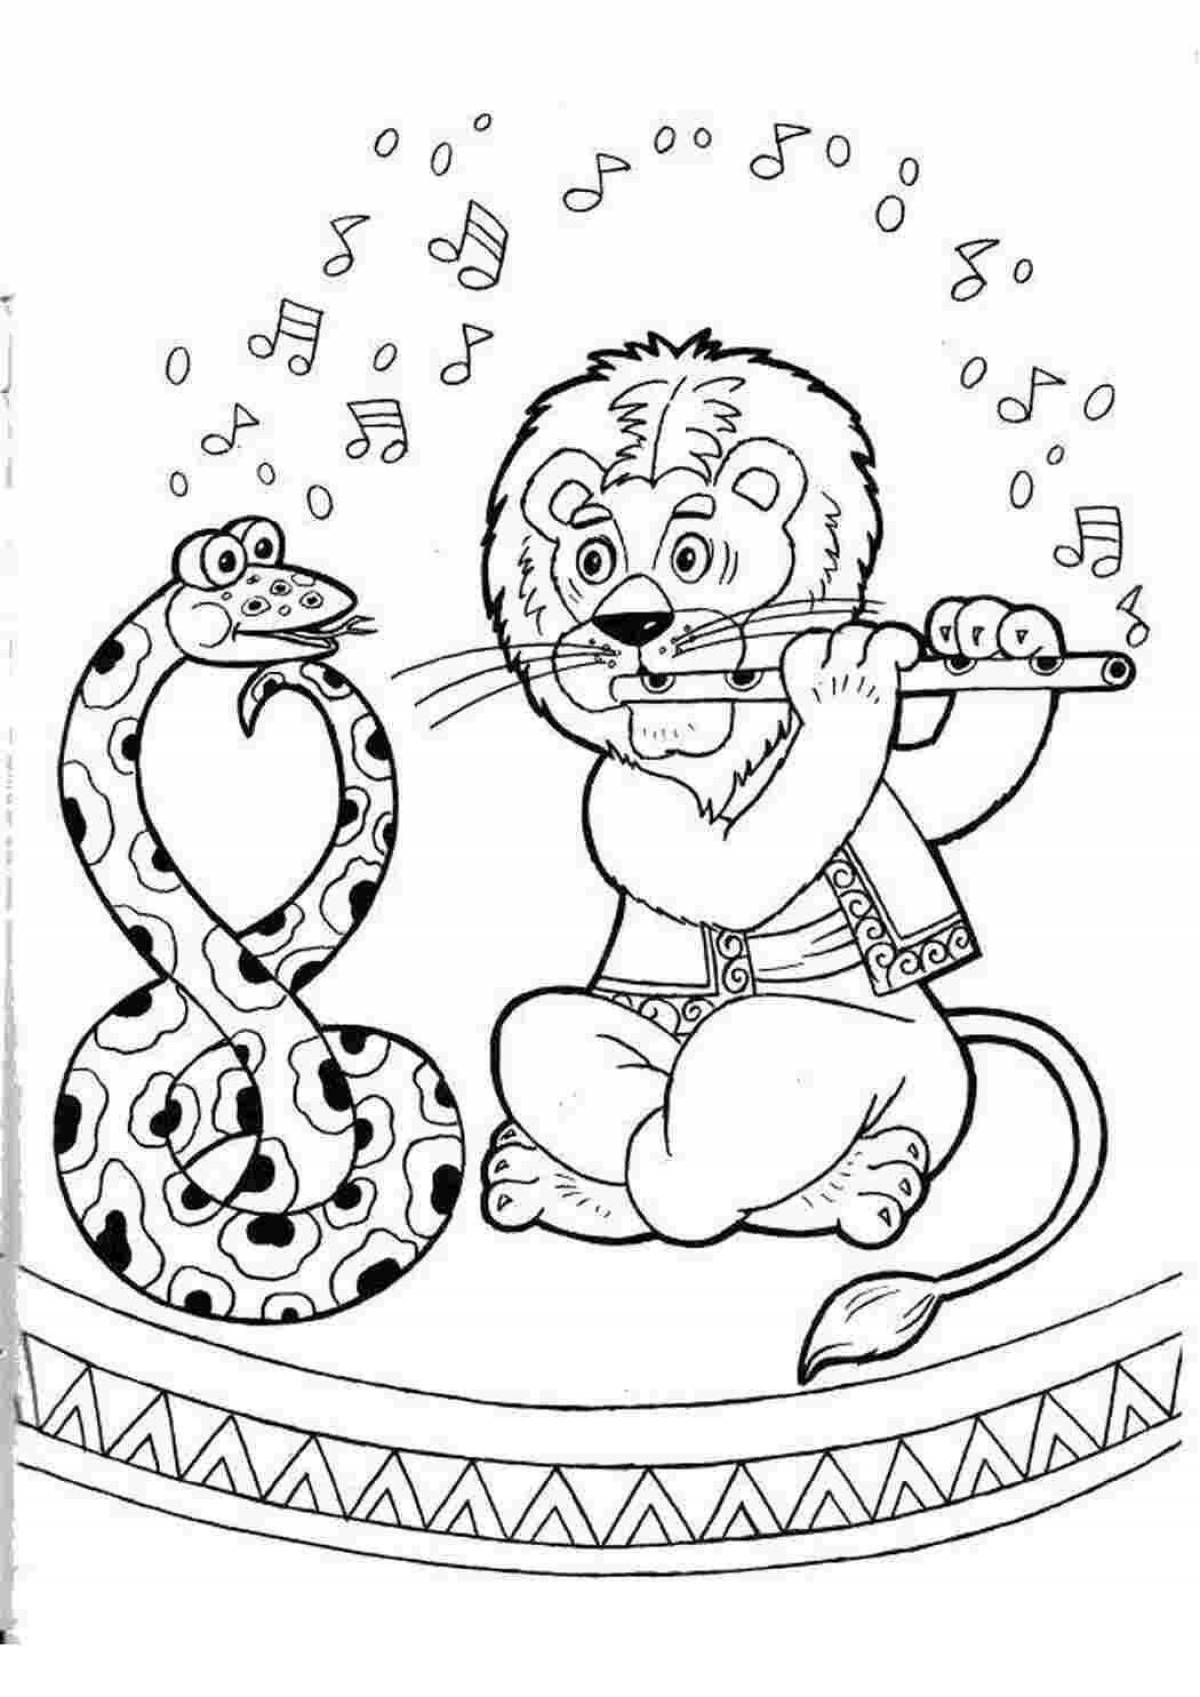 Coloring book joyous circus for children 7-8 years old